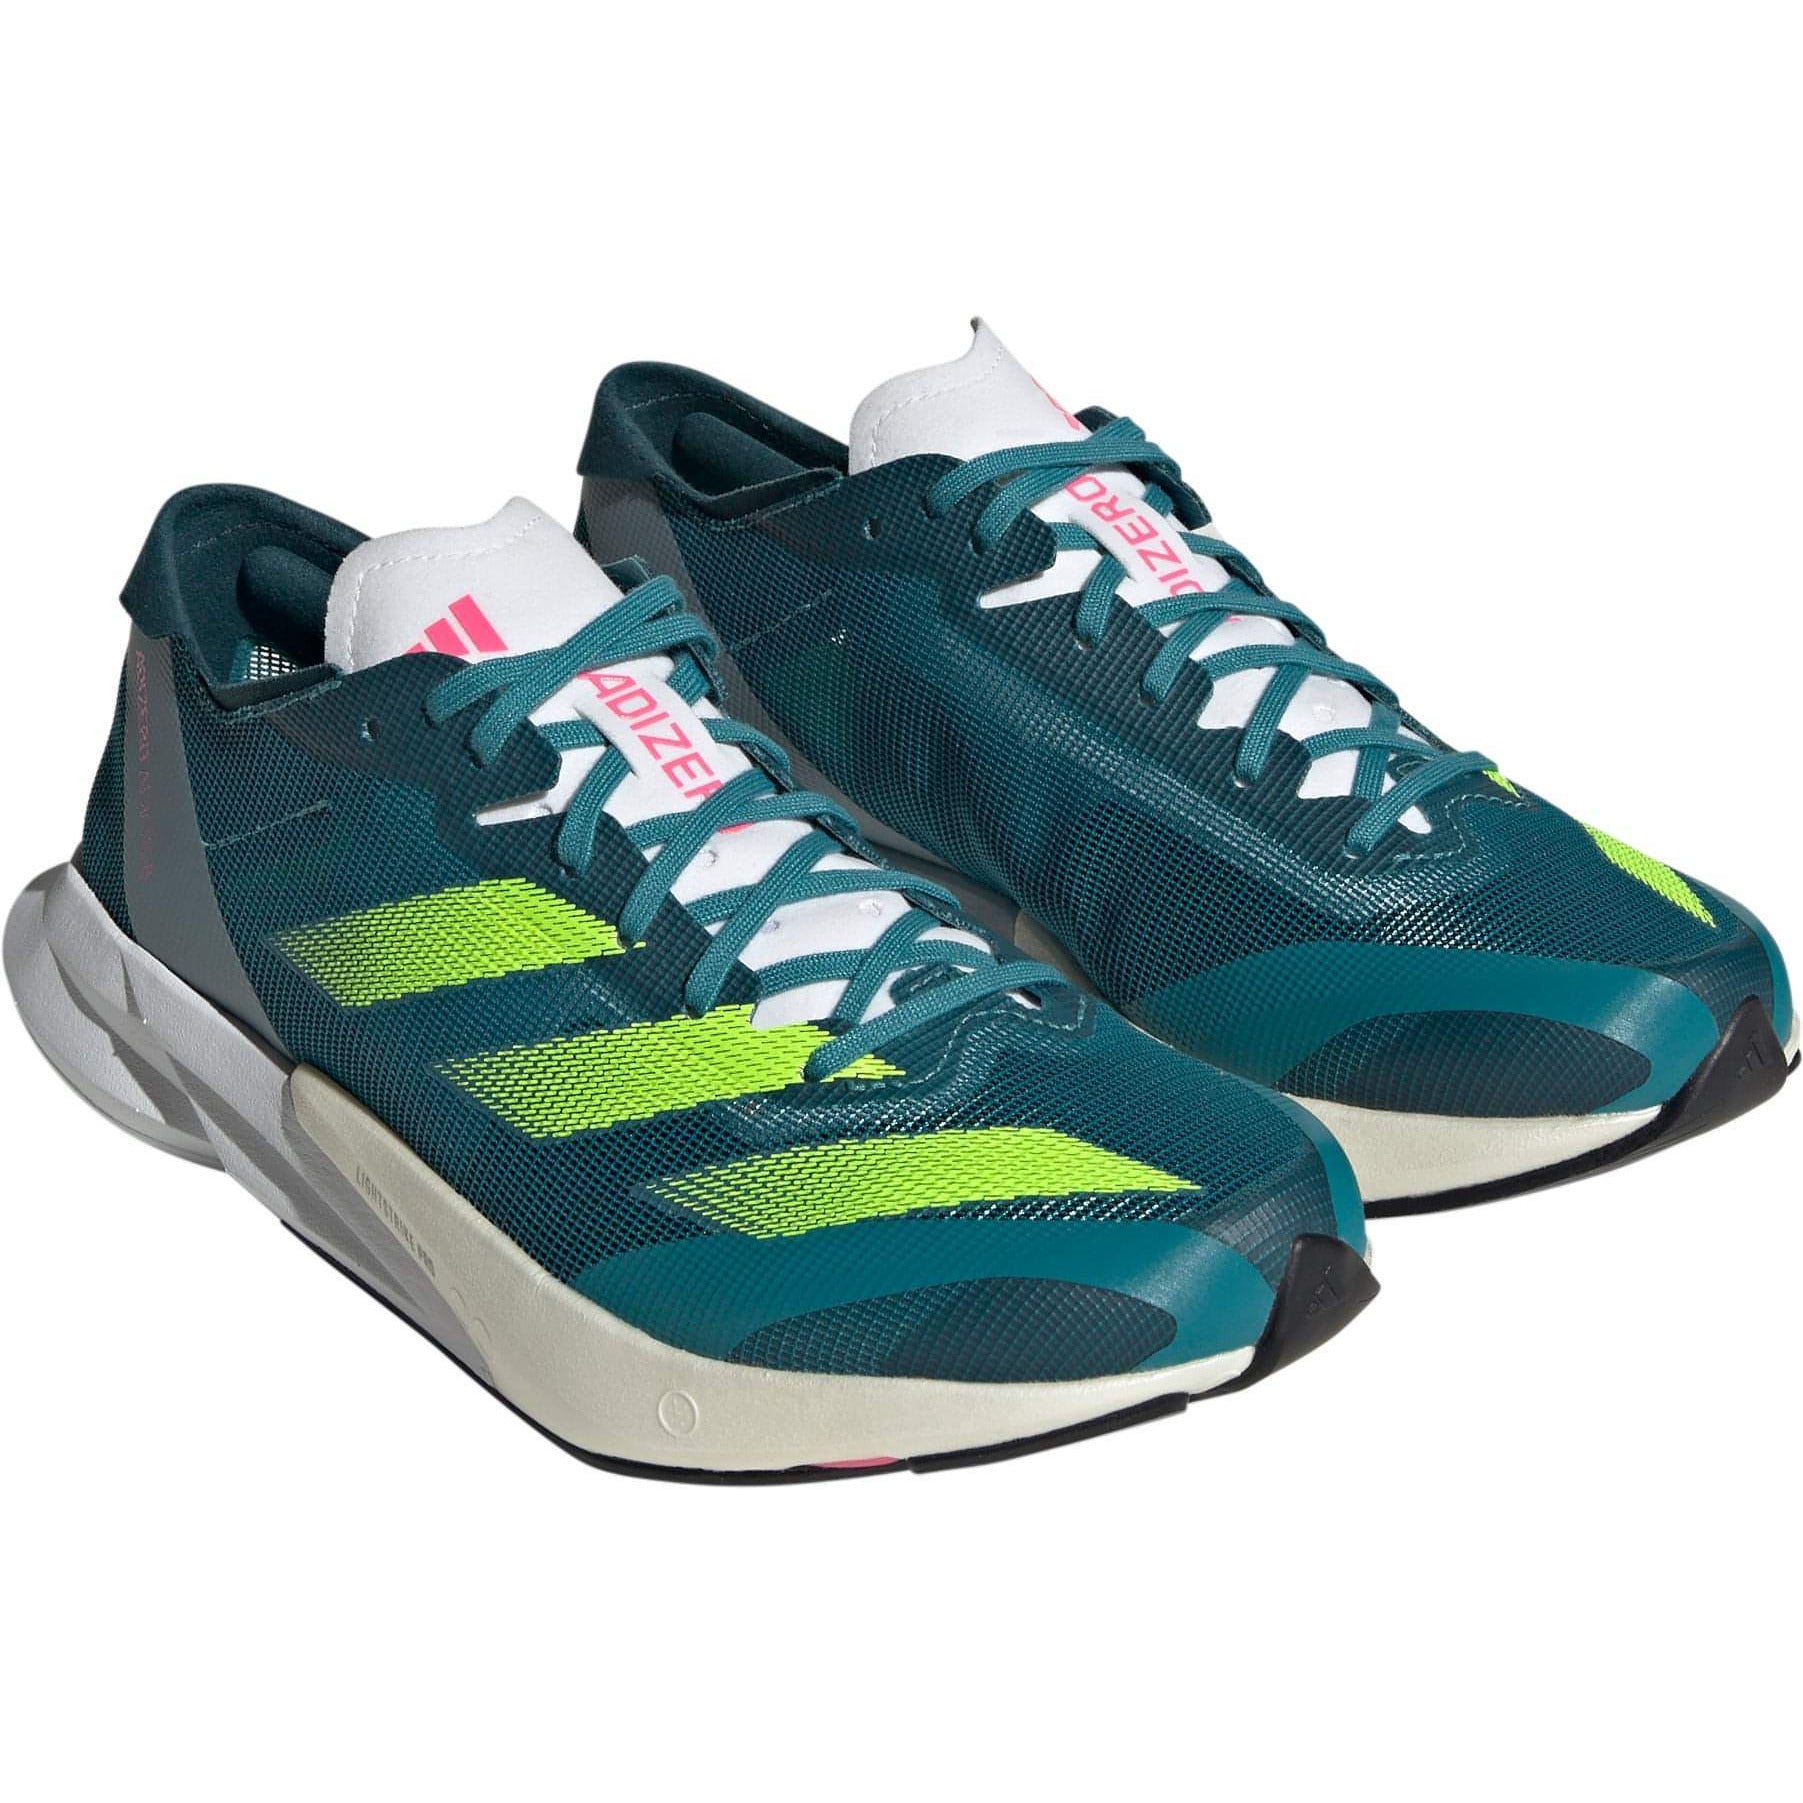 Adidas Adizero Adios Shoes Hp9722 Front - Front View